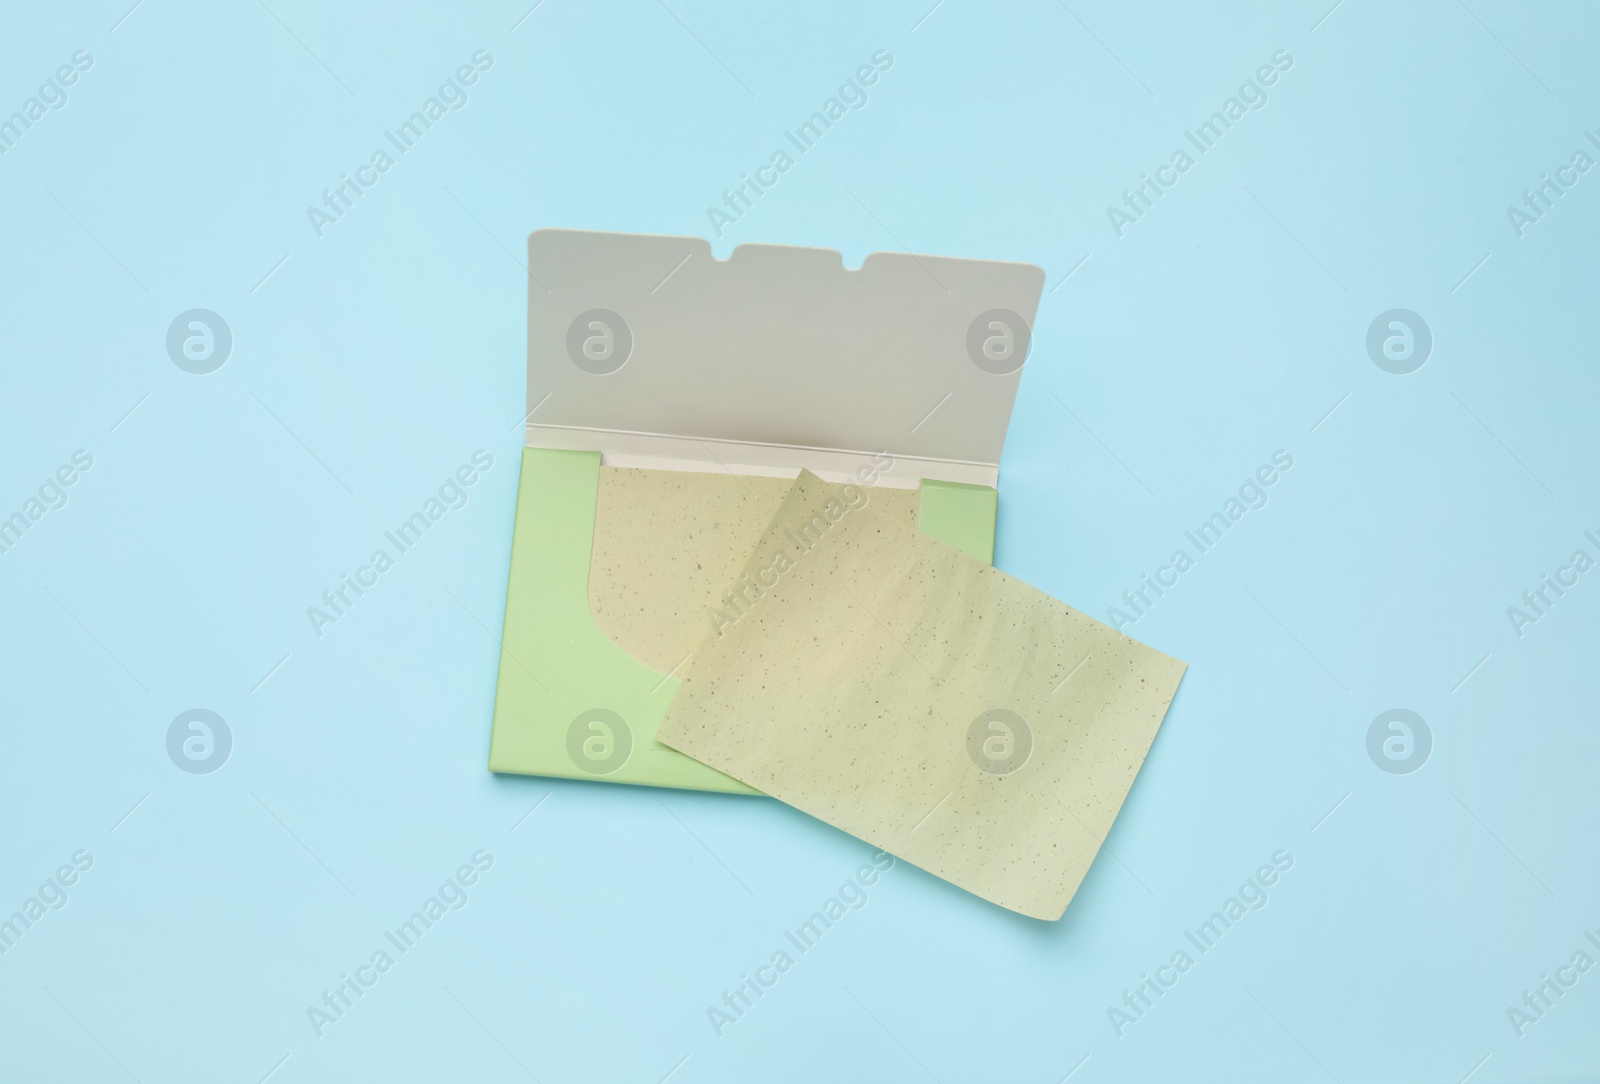 Photo of Facial oil blotting tissues on light blue background, flat lay. Mattifying wipes